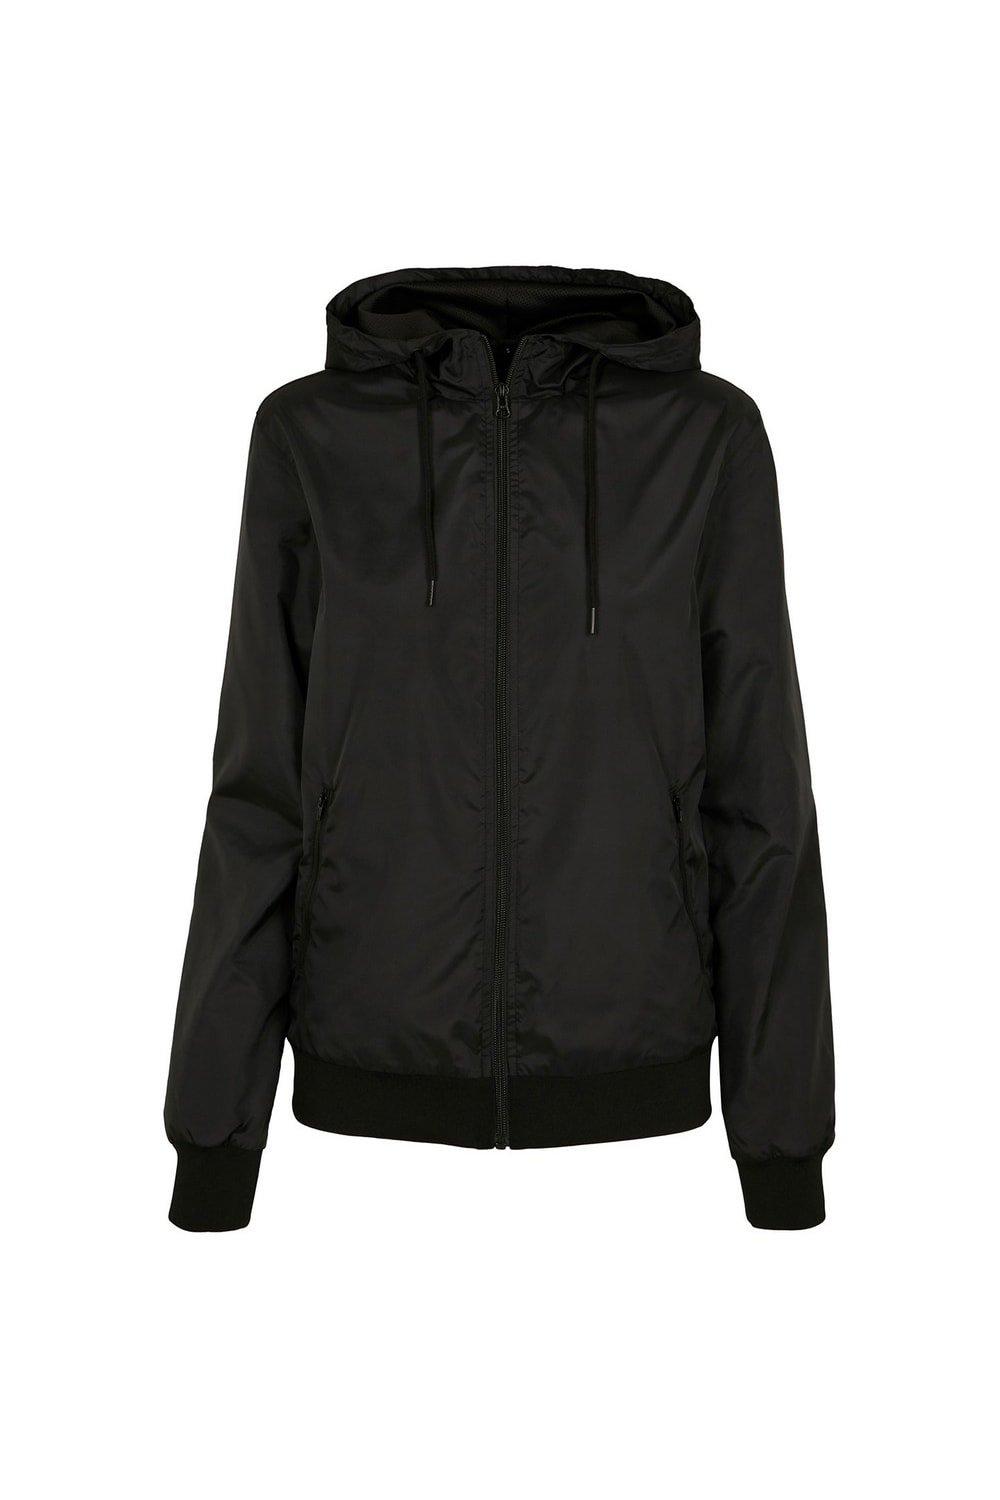 Windrunner Two Tone Jacket